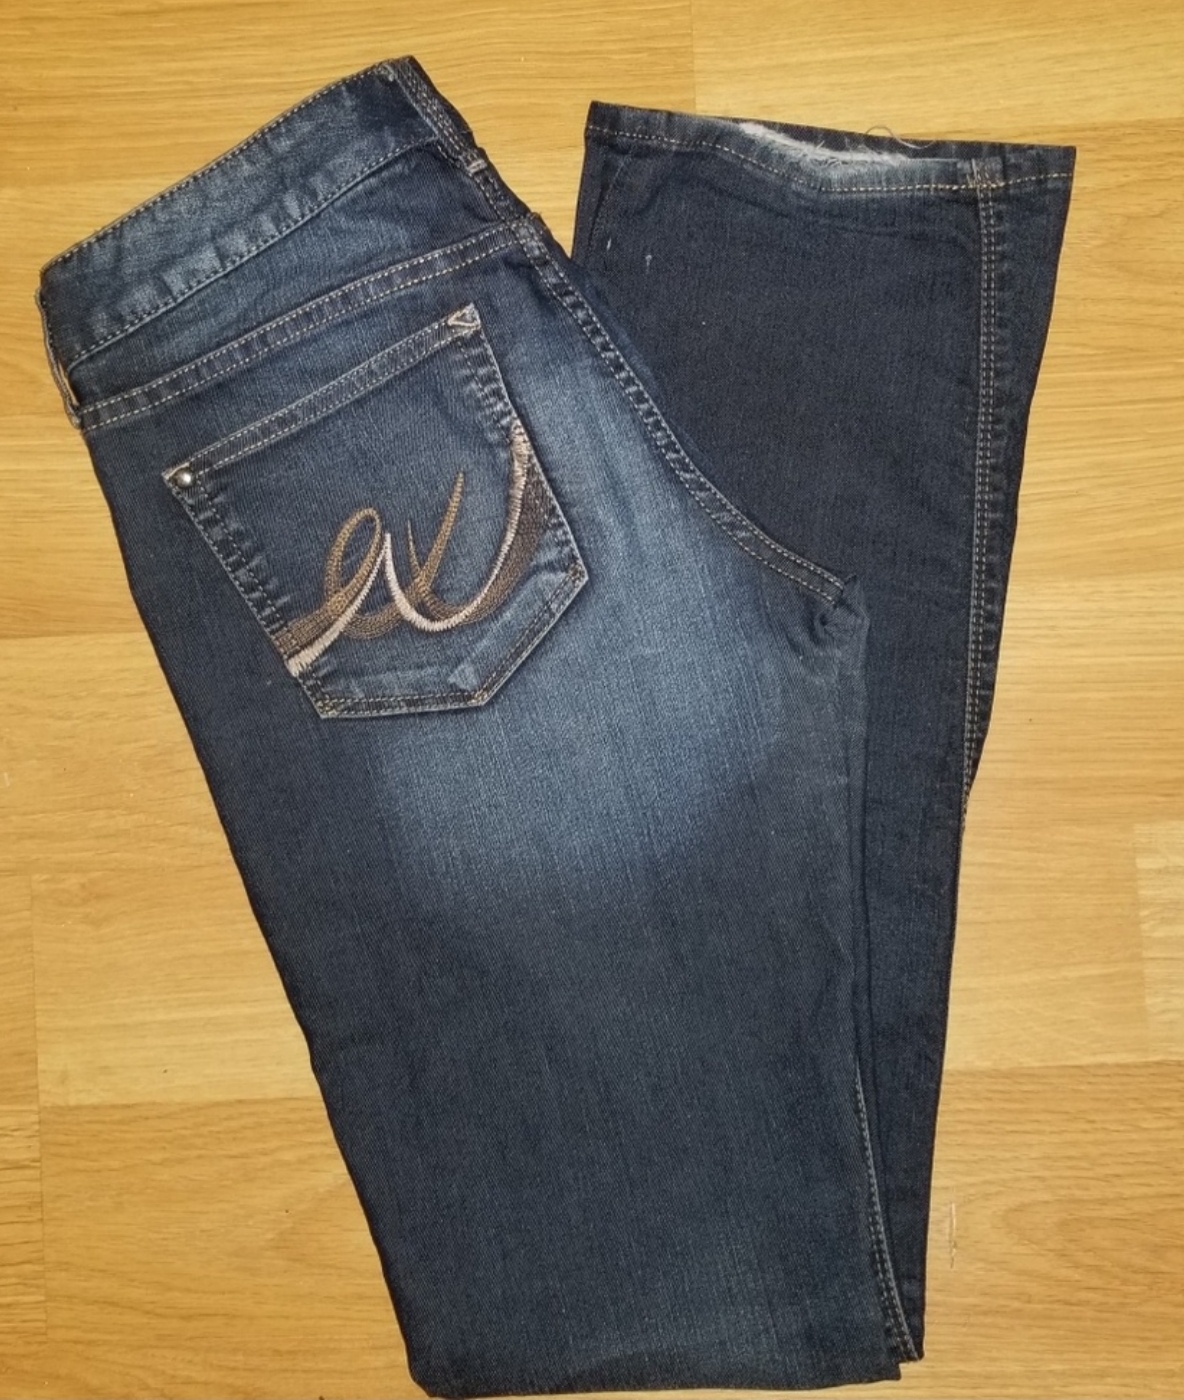 Express Zelda Barely Boot Cut Jeans Available for Free Online Swapping ...